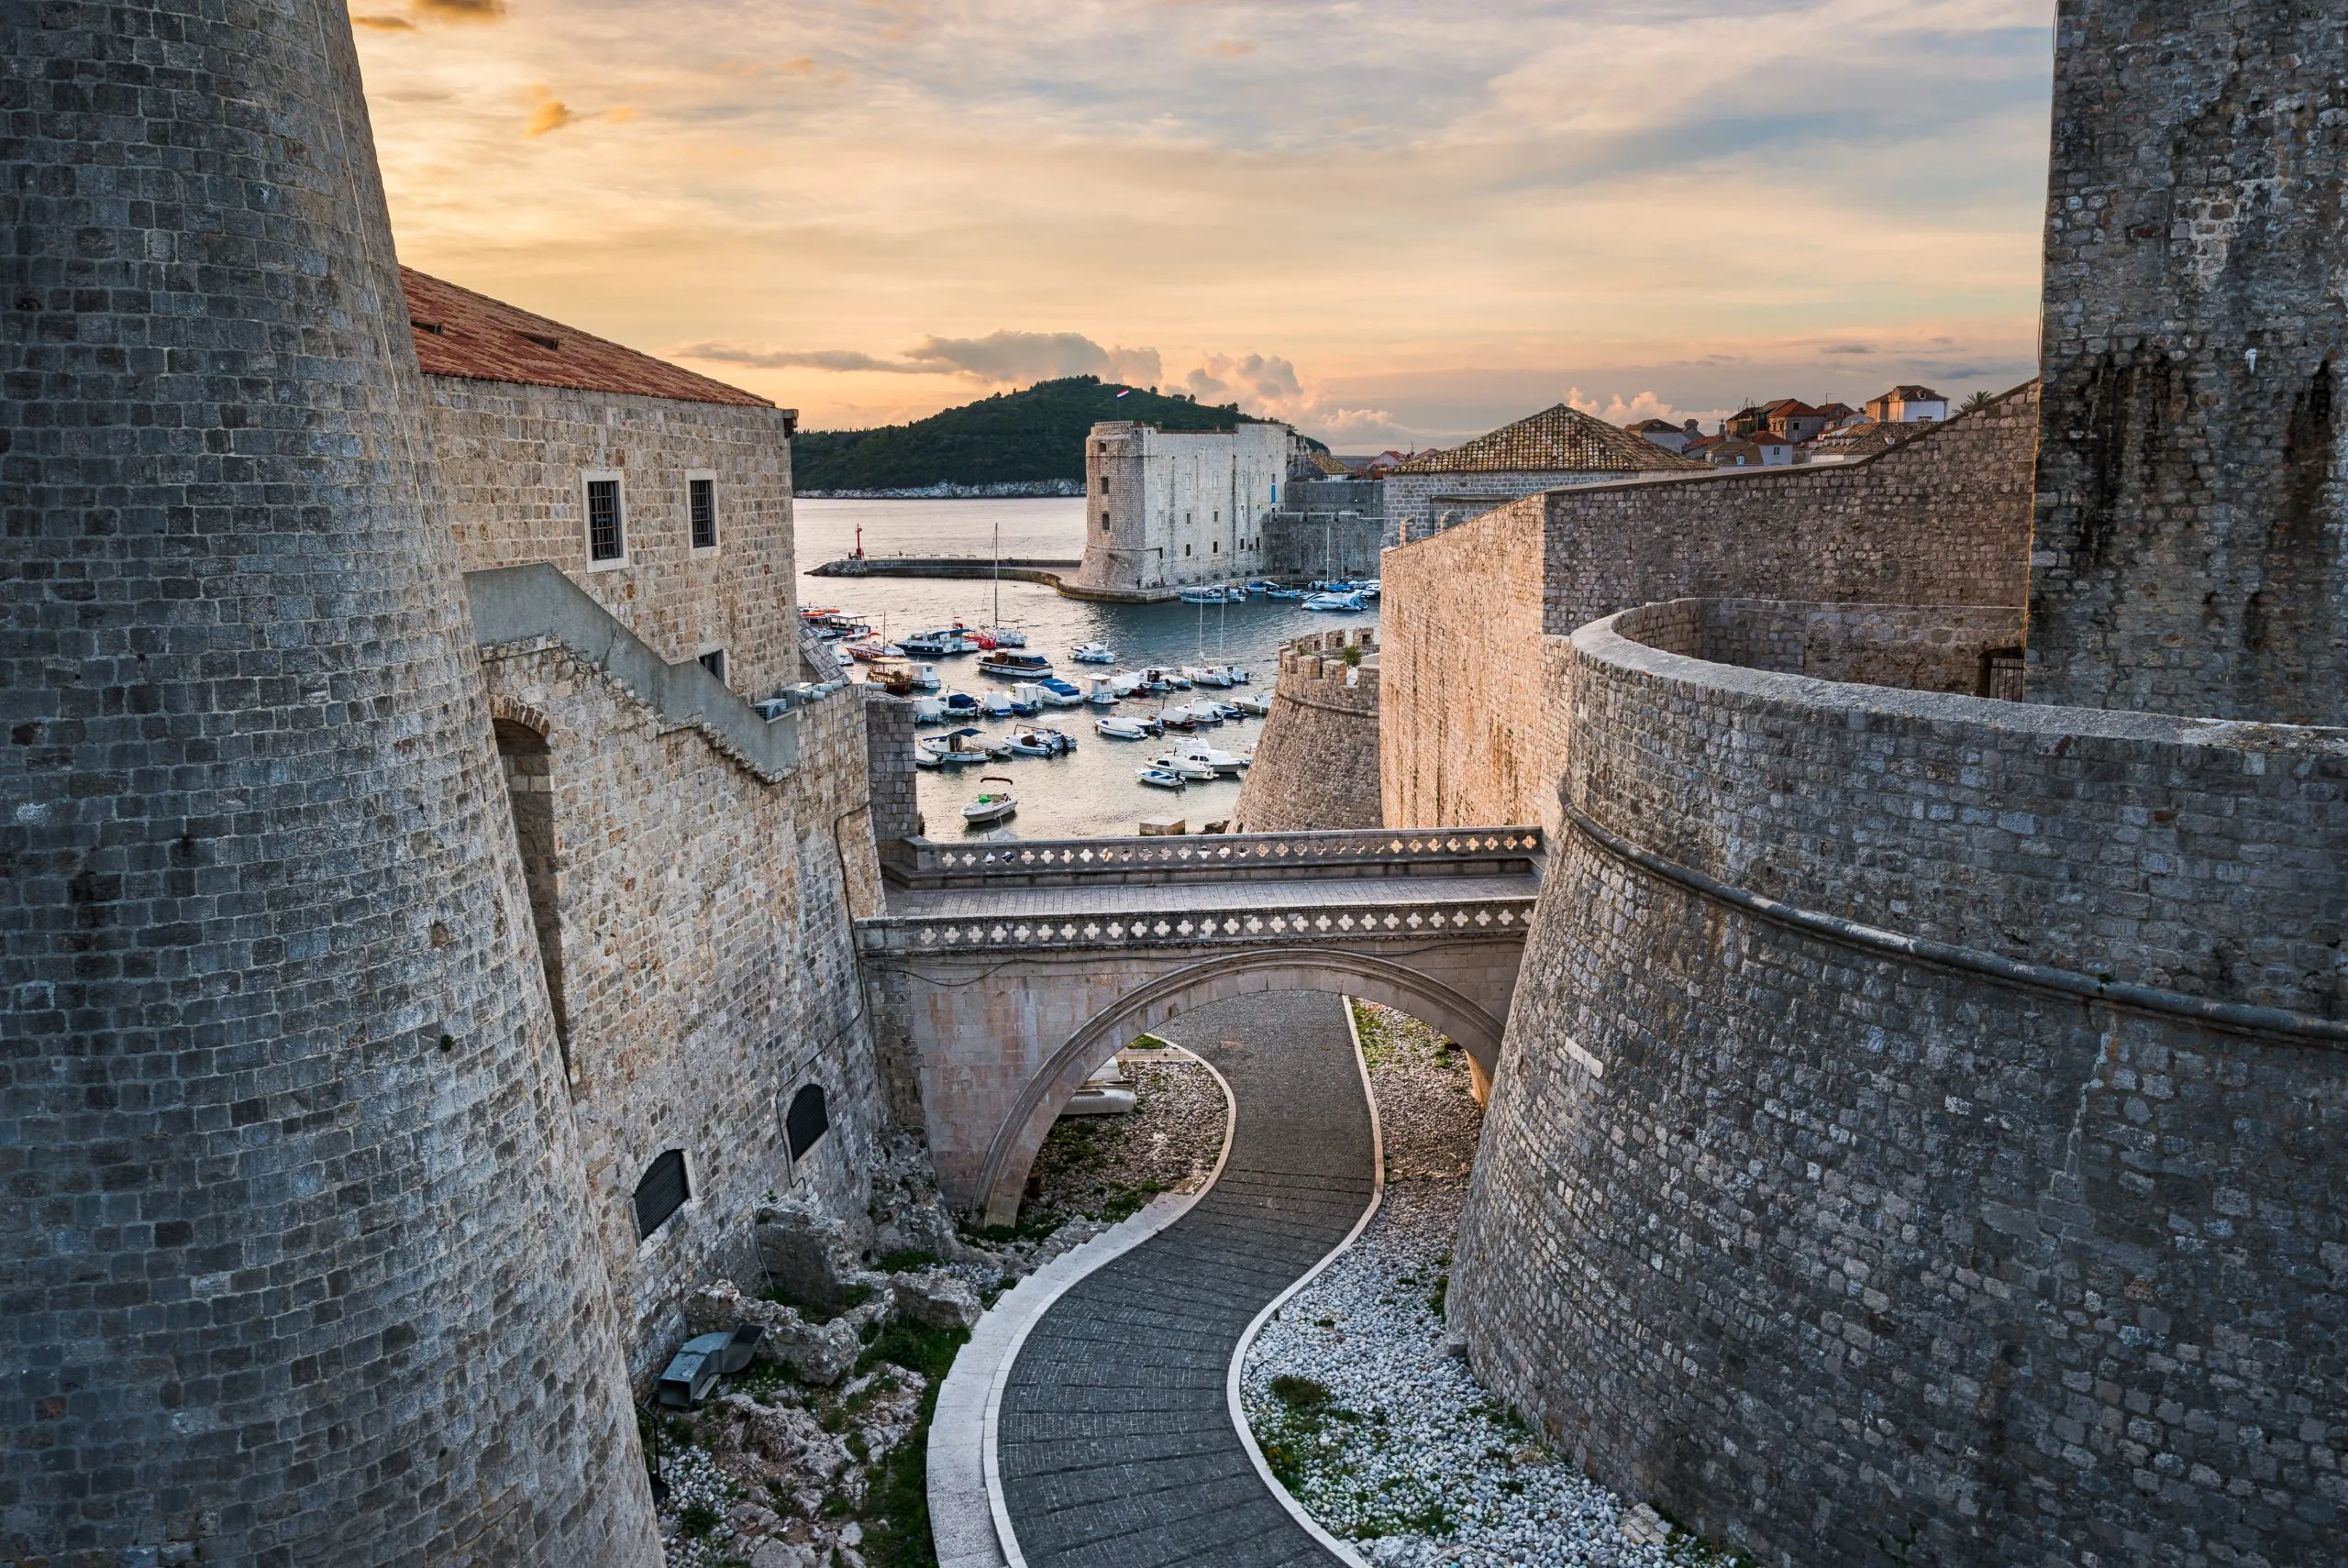 Old town of Dubrovnik, Croatia with view to the harbor